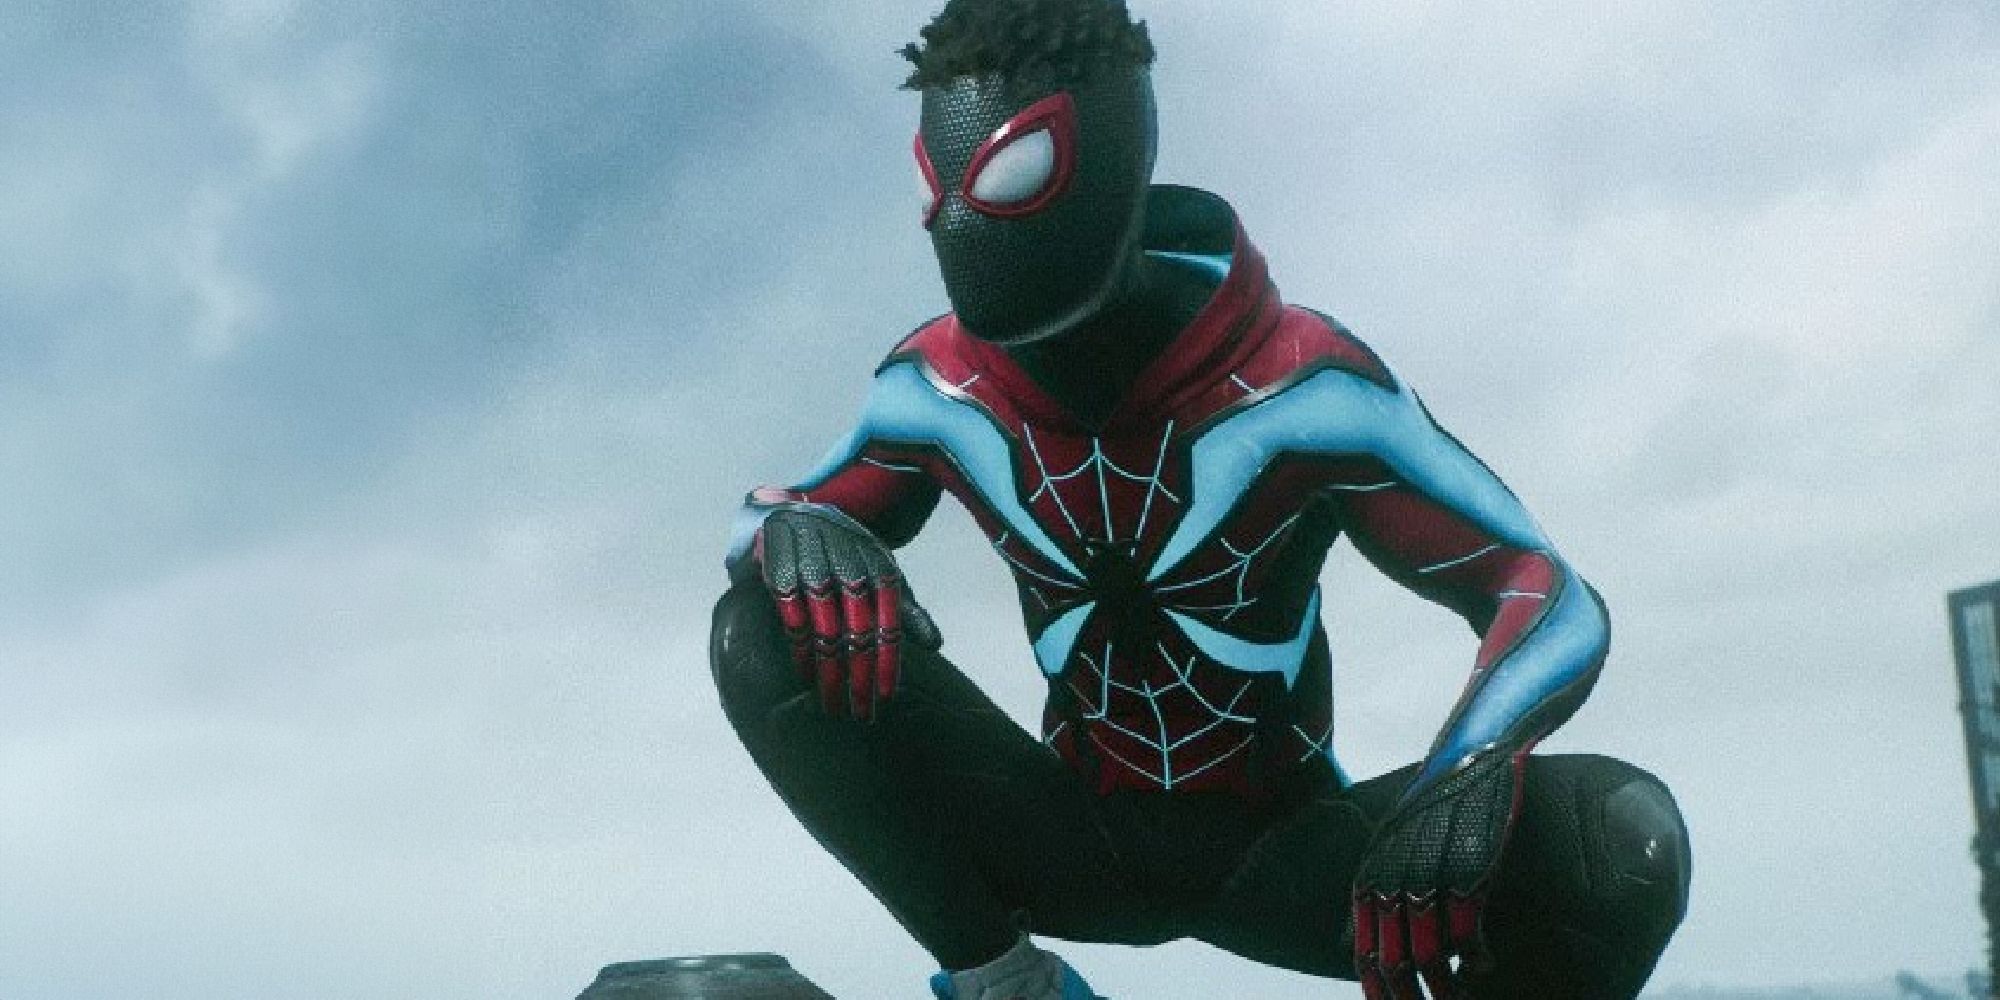 So Miles Morales' New Suit Is Just A Brand Deal?